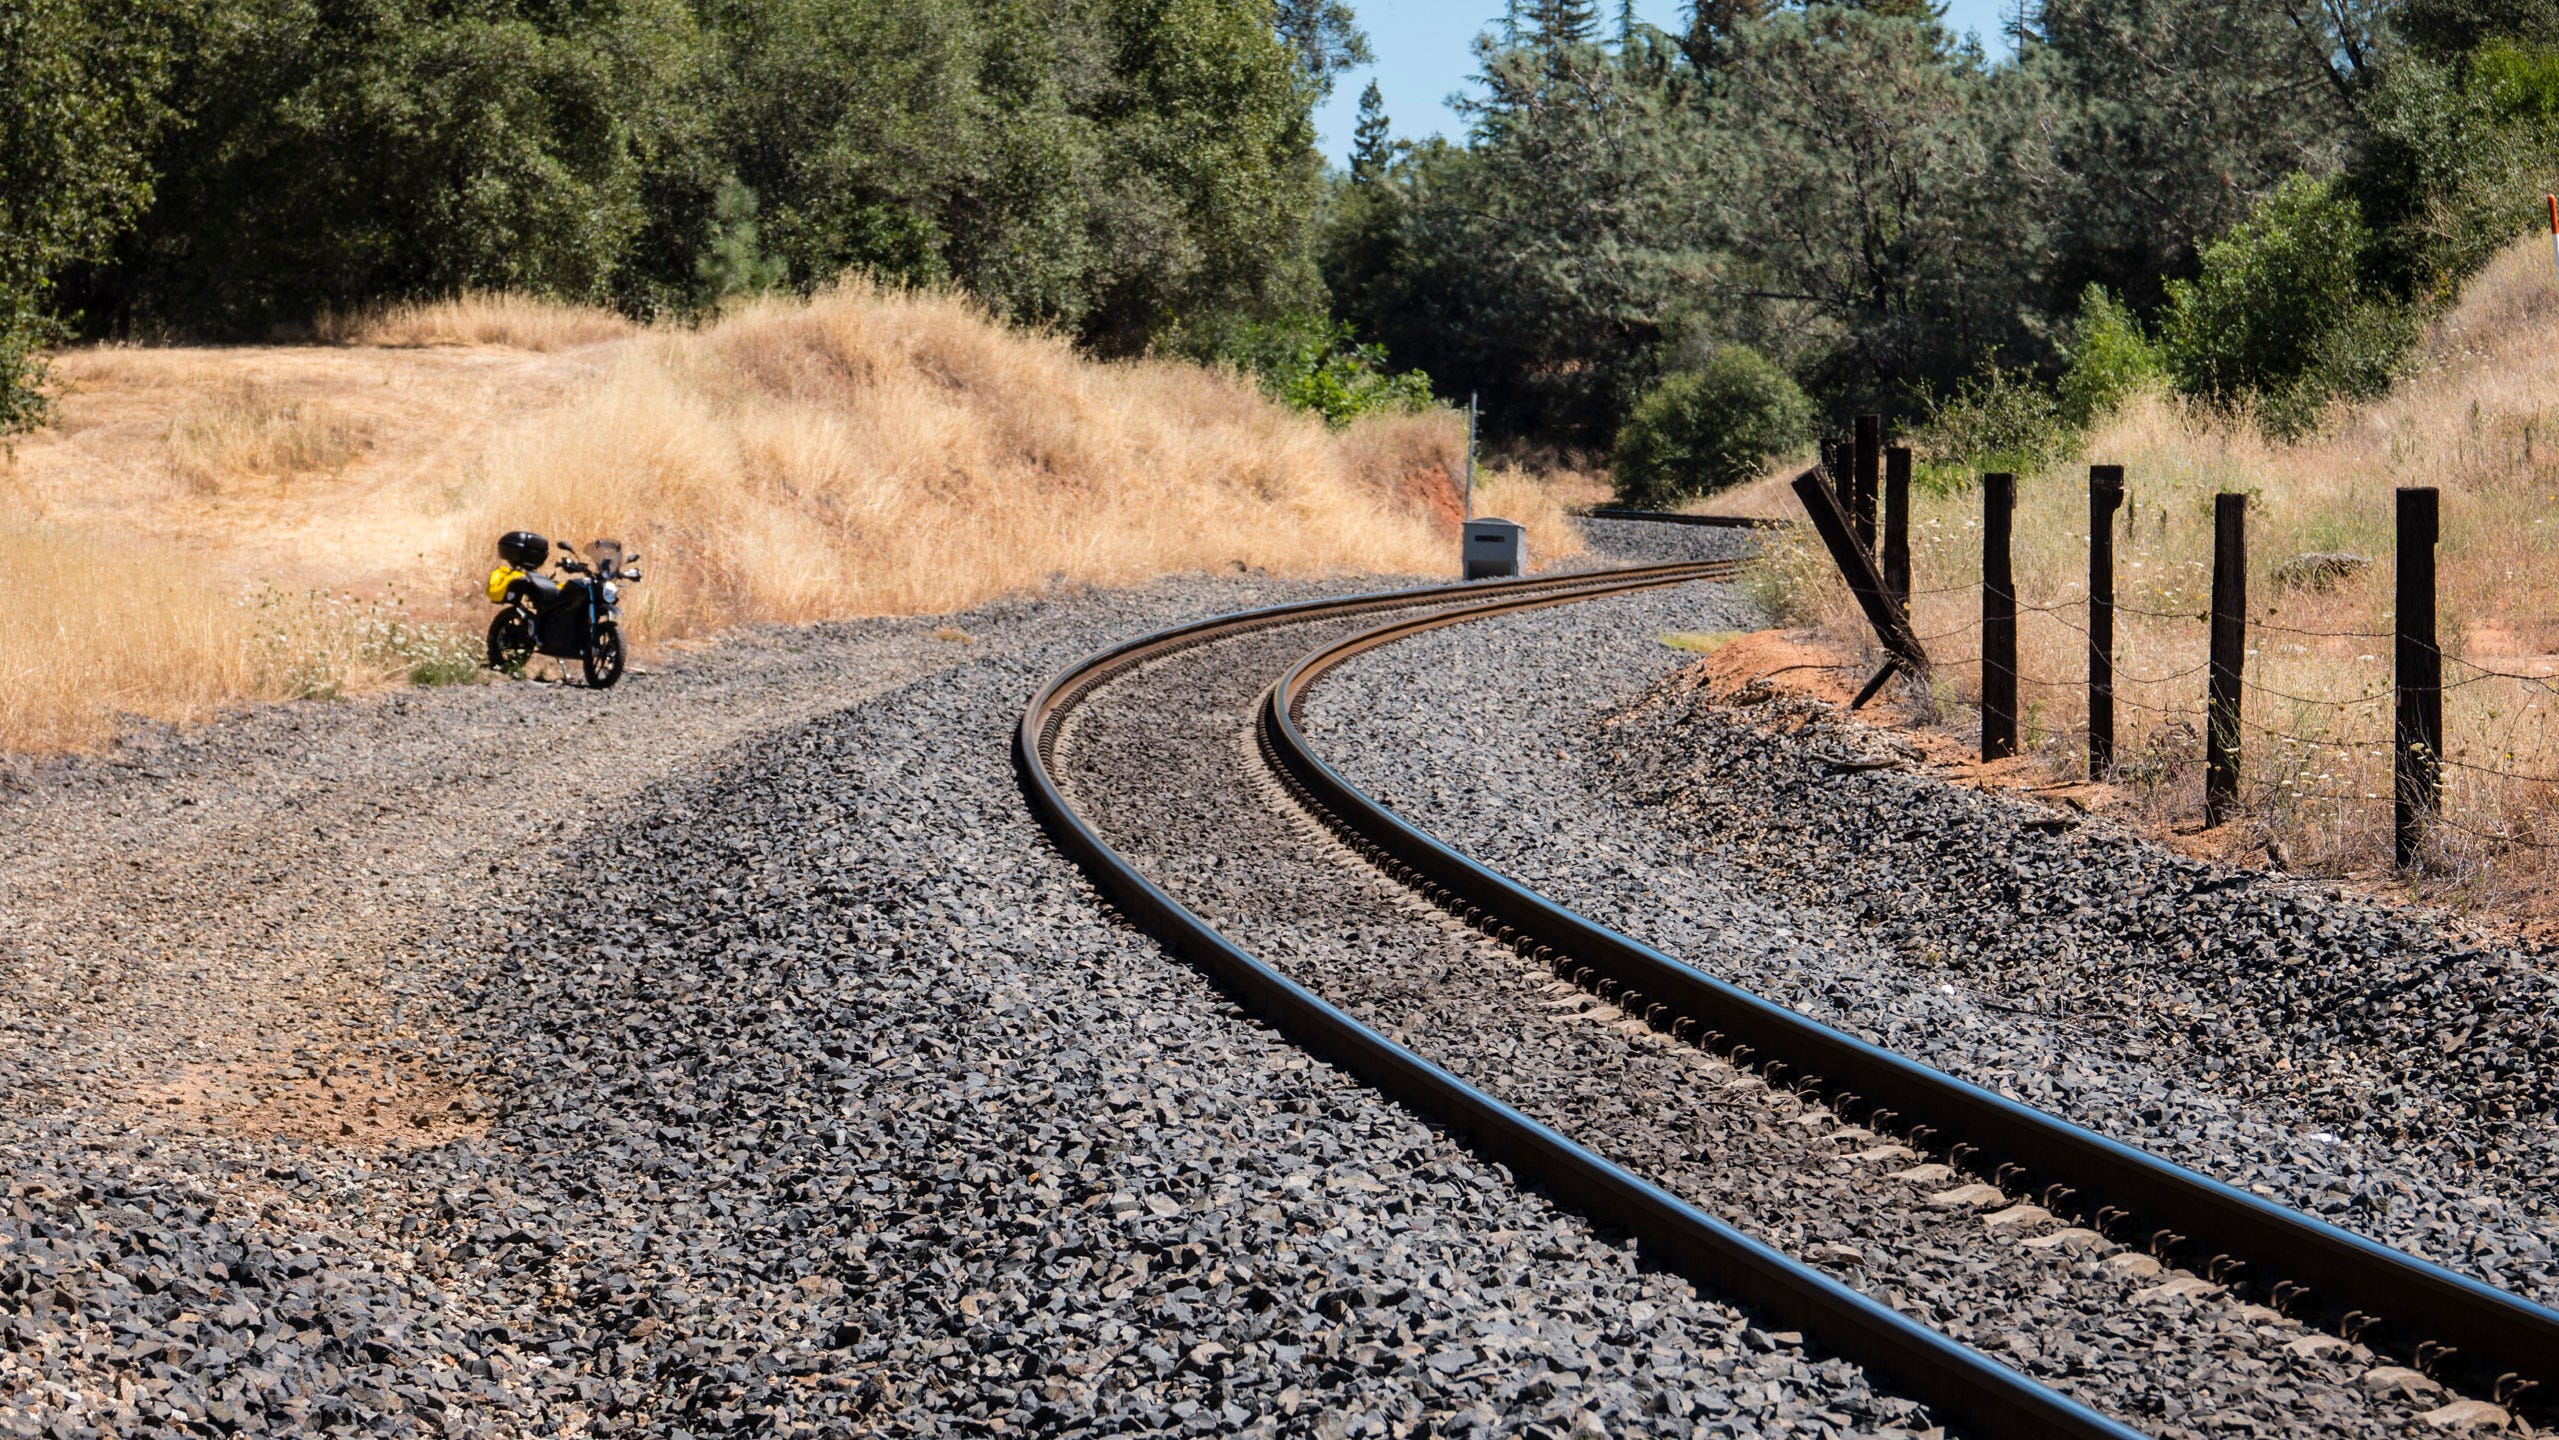 A railroad track curves right and then left as it climbs a grade through tall grasses the color of hay and towards green trees. A cattle fence with stout, wooden posts and three rows of barbed wire lines the railroad on the right. On the left, a motorcycle sits on the verge of the gravel railroad bed.